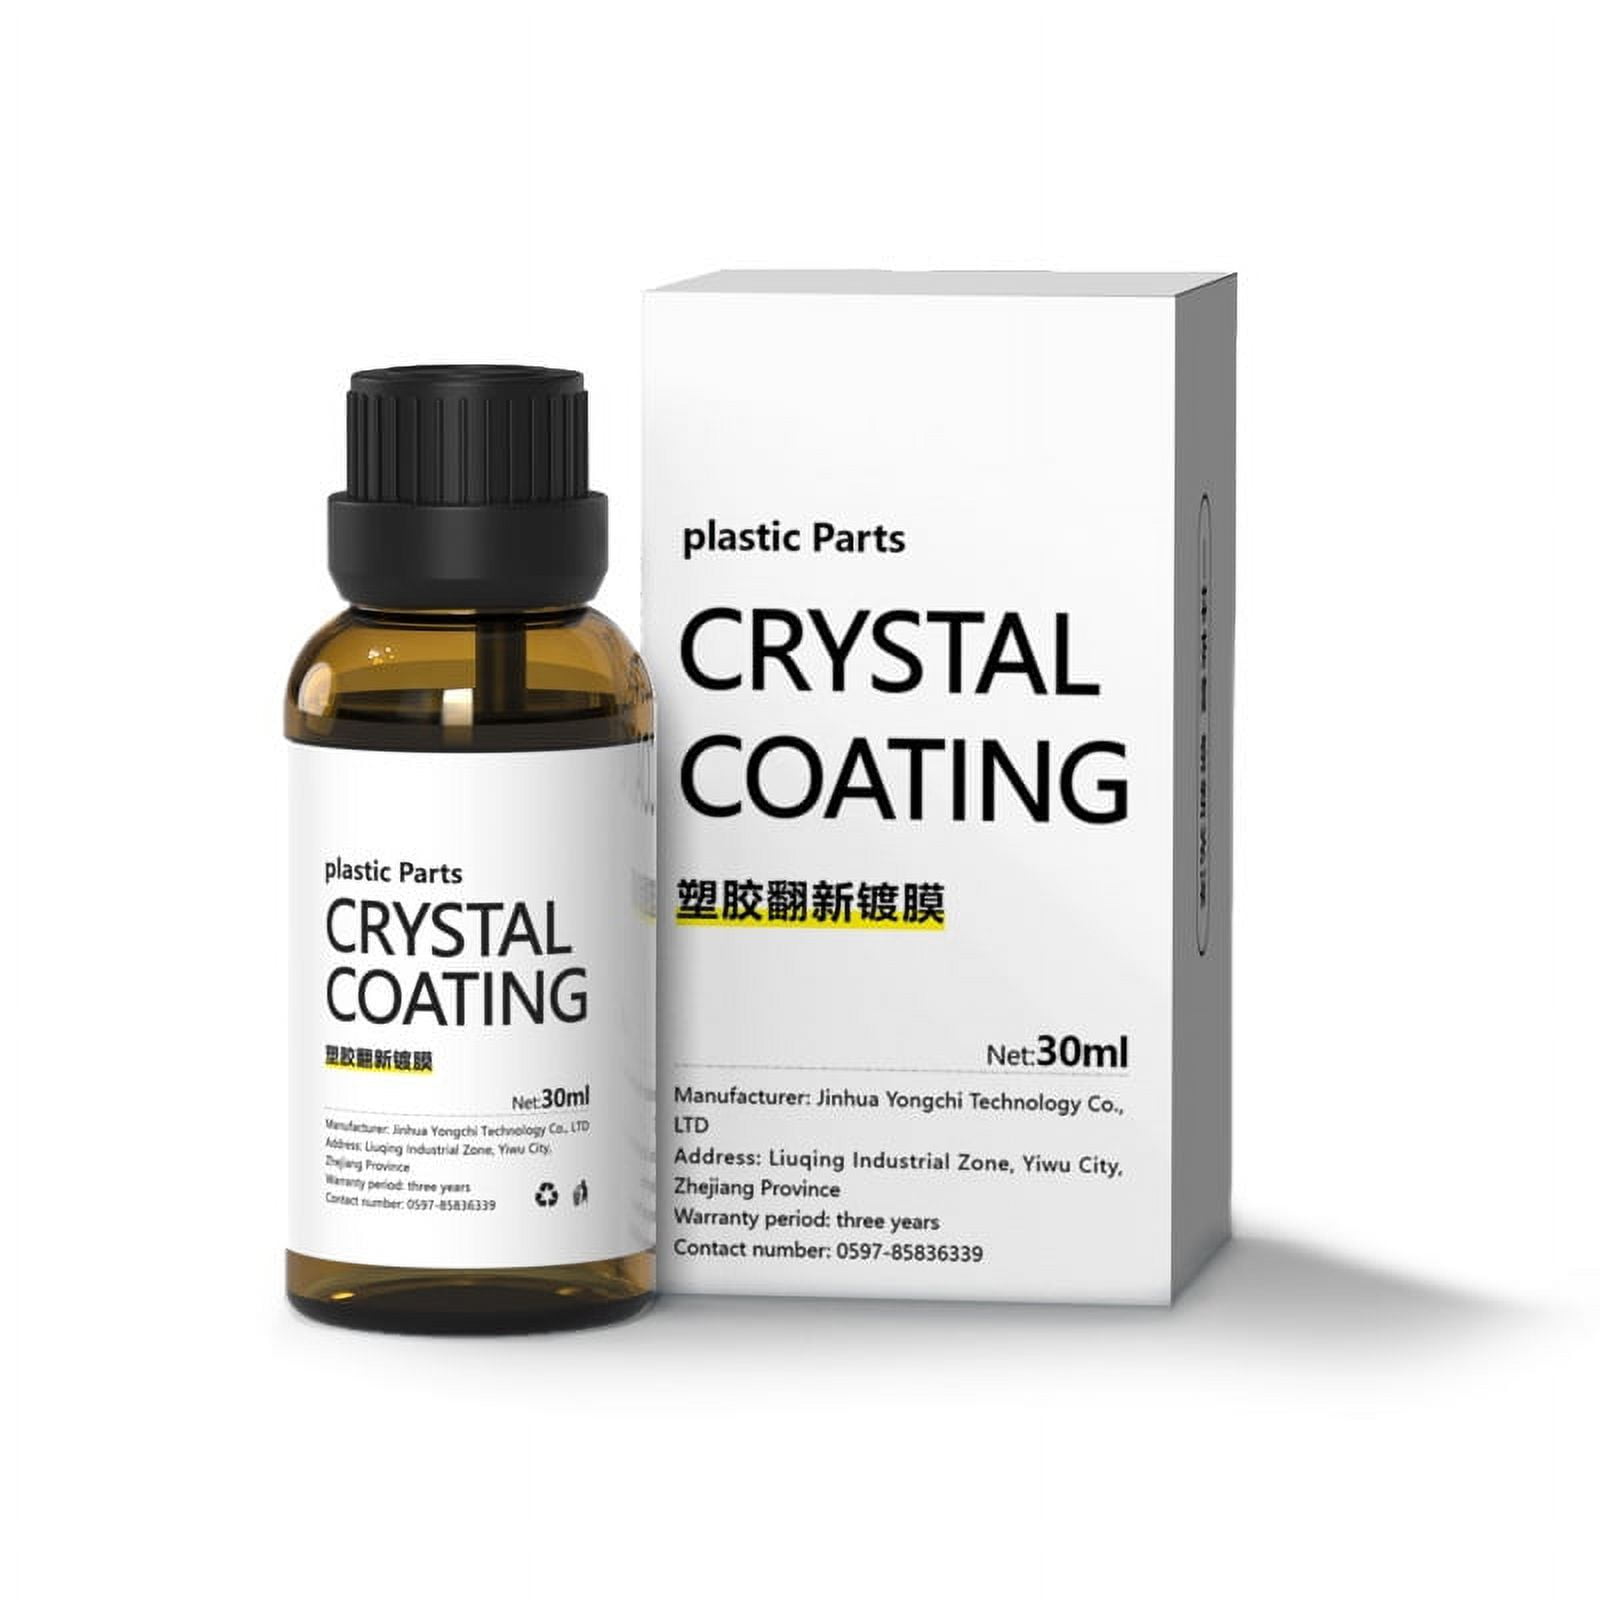 A SCIENTIFICALLY FORMULATED Plastics Parts Coating for Long Lasting Results  $12.61 - PicClick AU